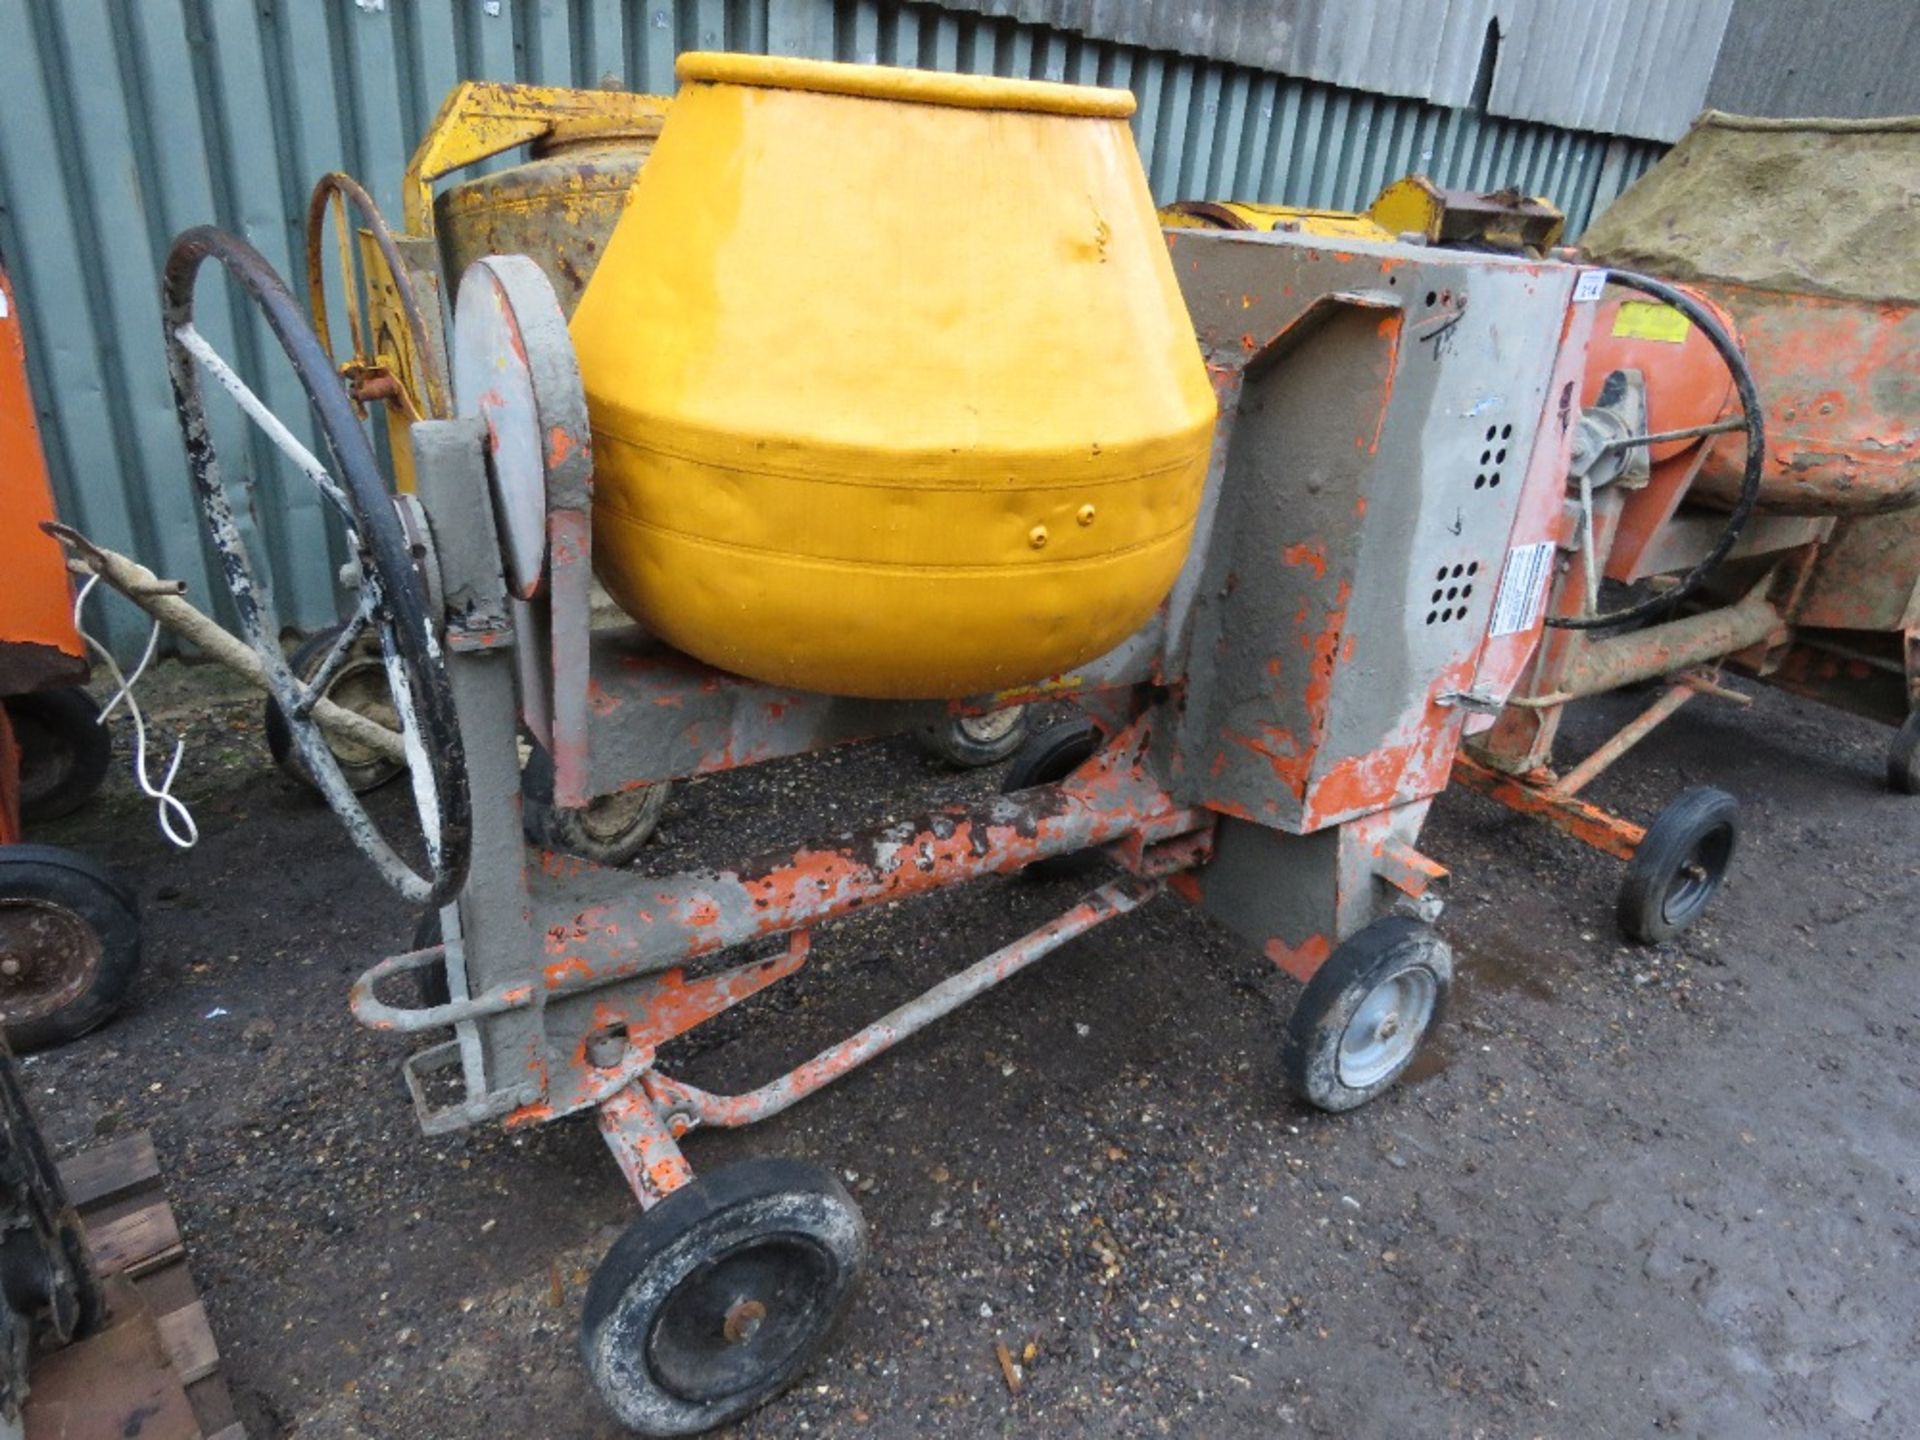 BELLE 100XT YANMAR ENGINED CEMENT MIXER. WHEN TESTED WAS SEEN TO RUN AND DRUM TURNED.